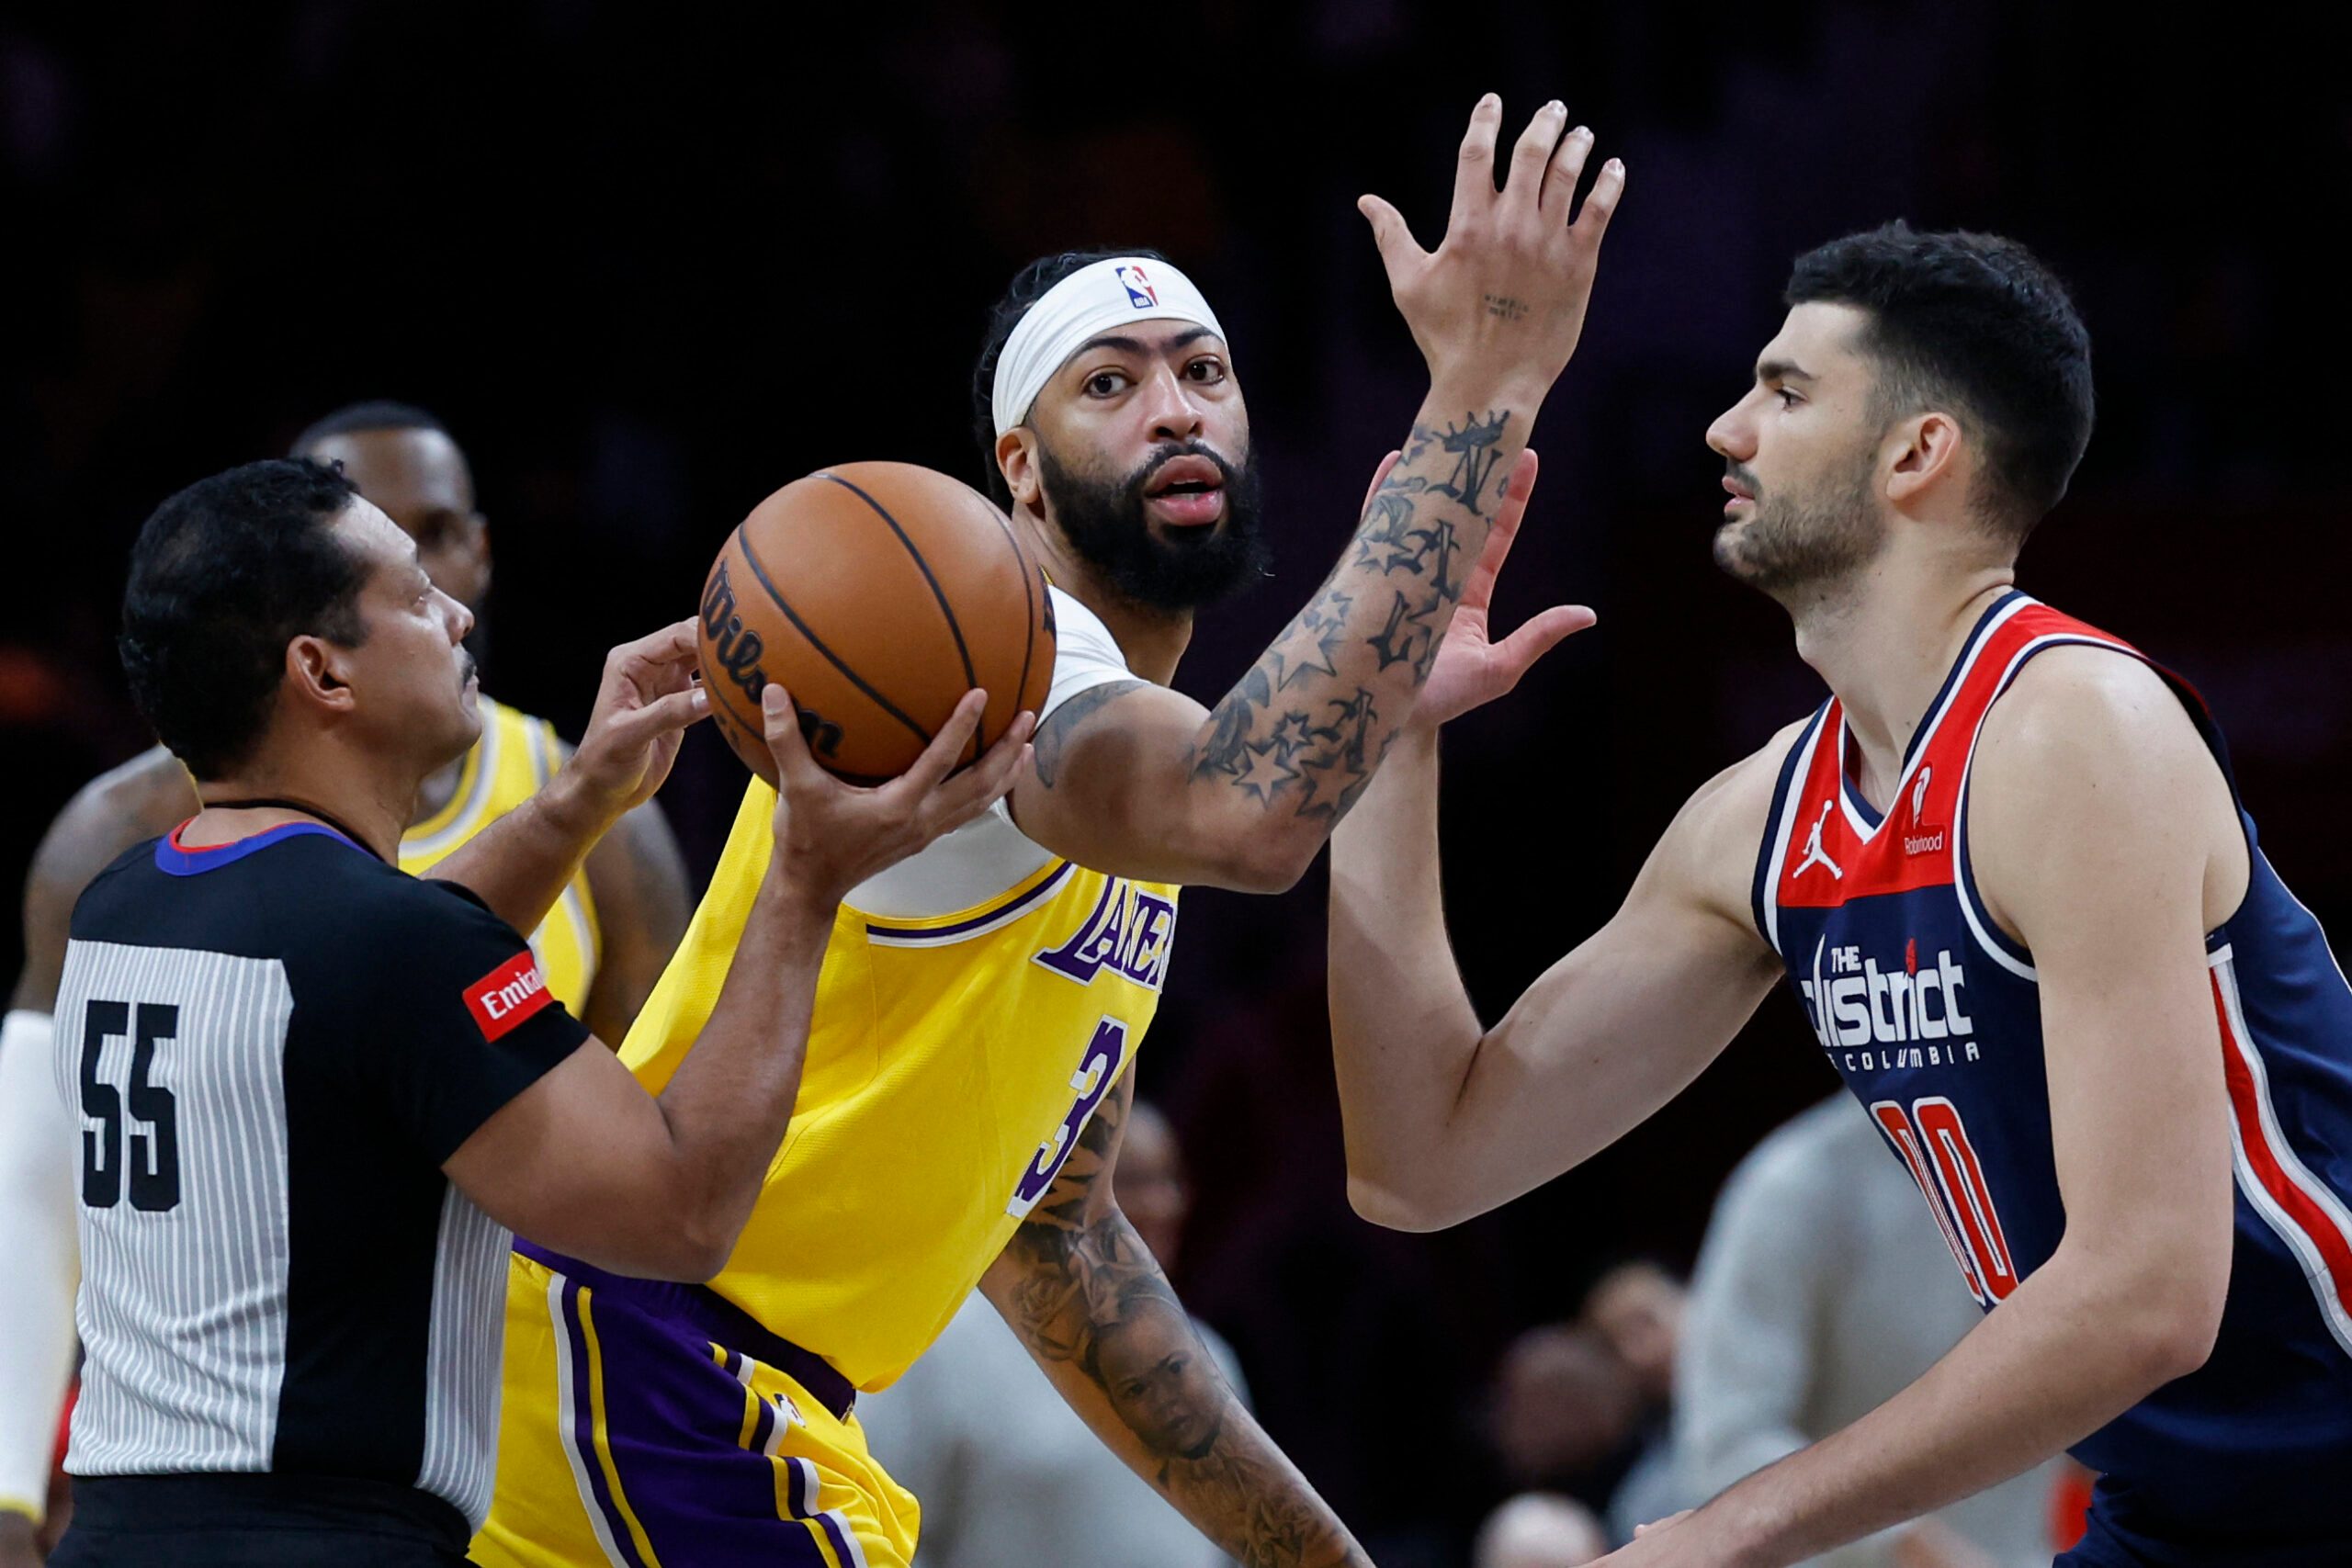 Lakers starters hang 113 points on Wizards